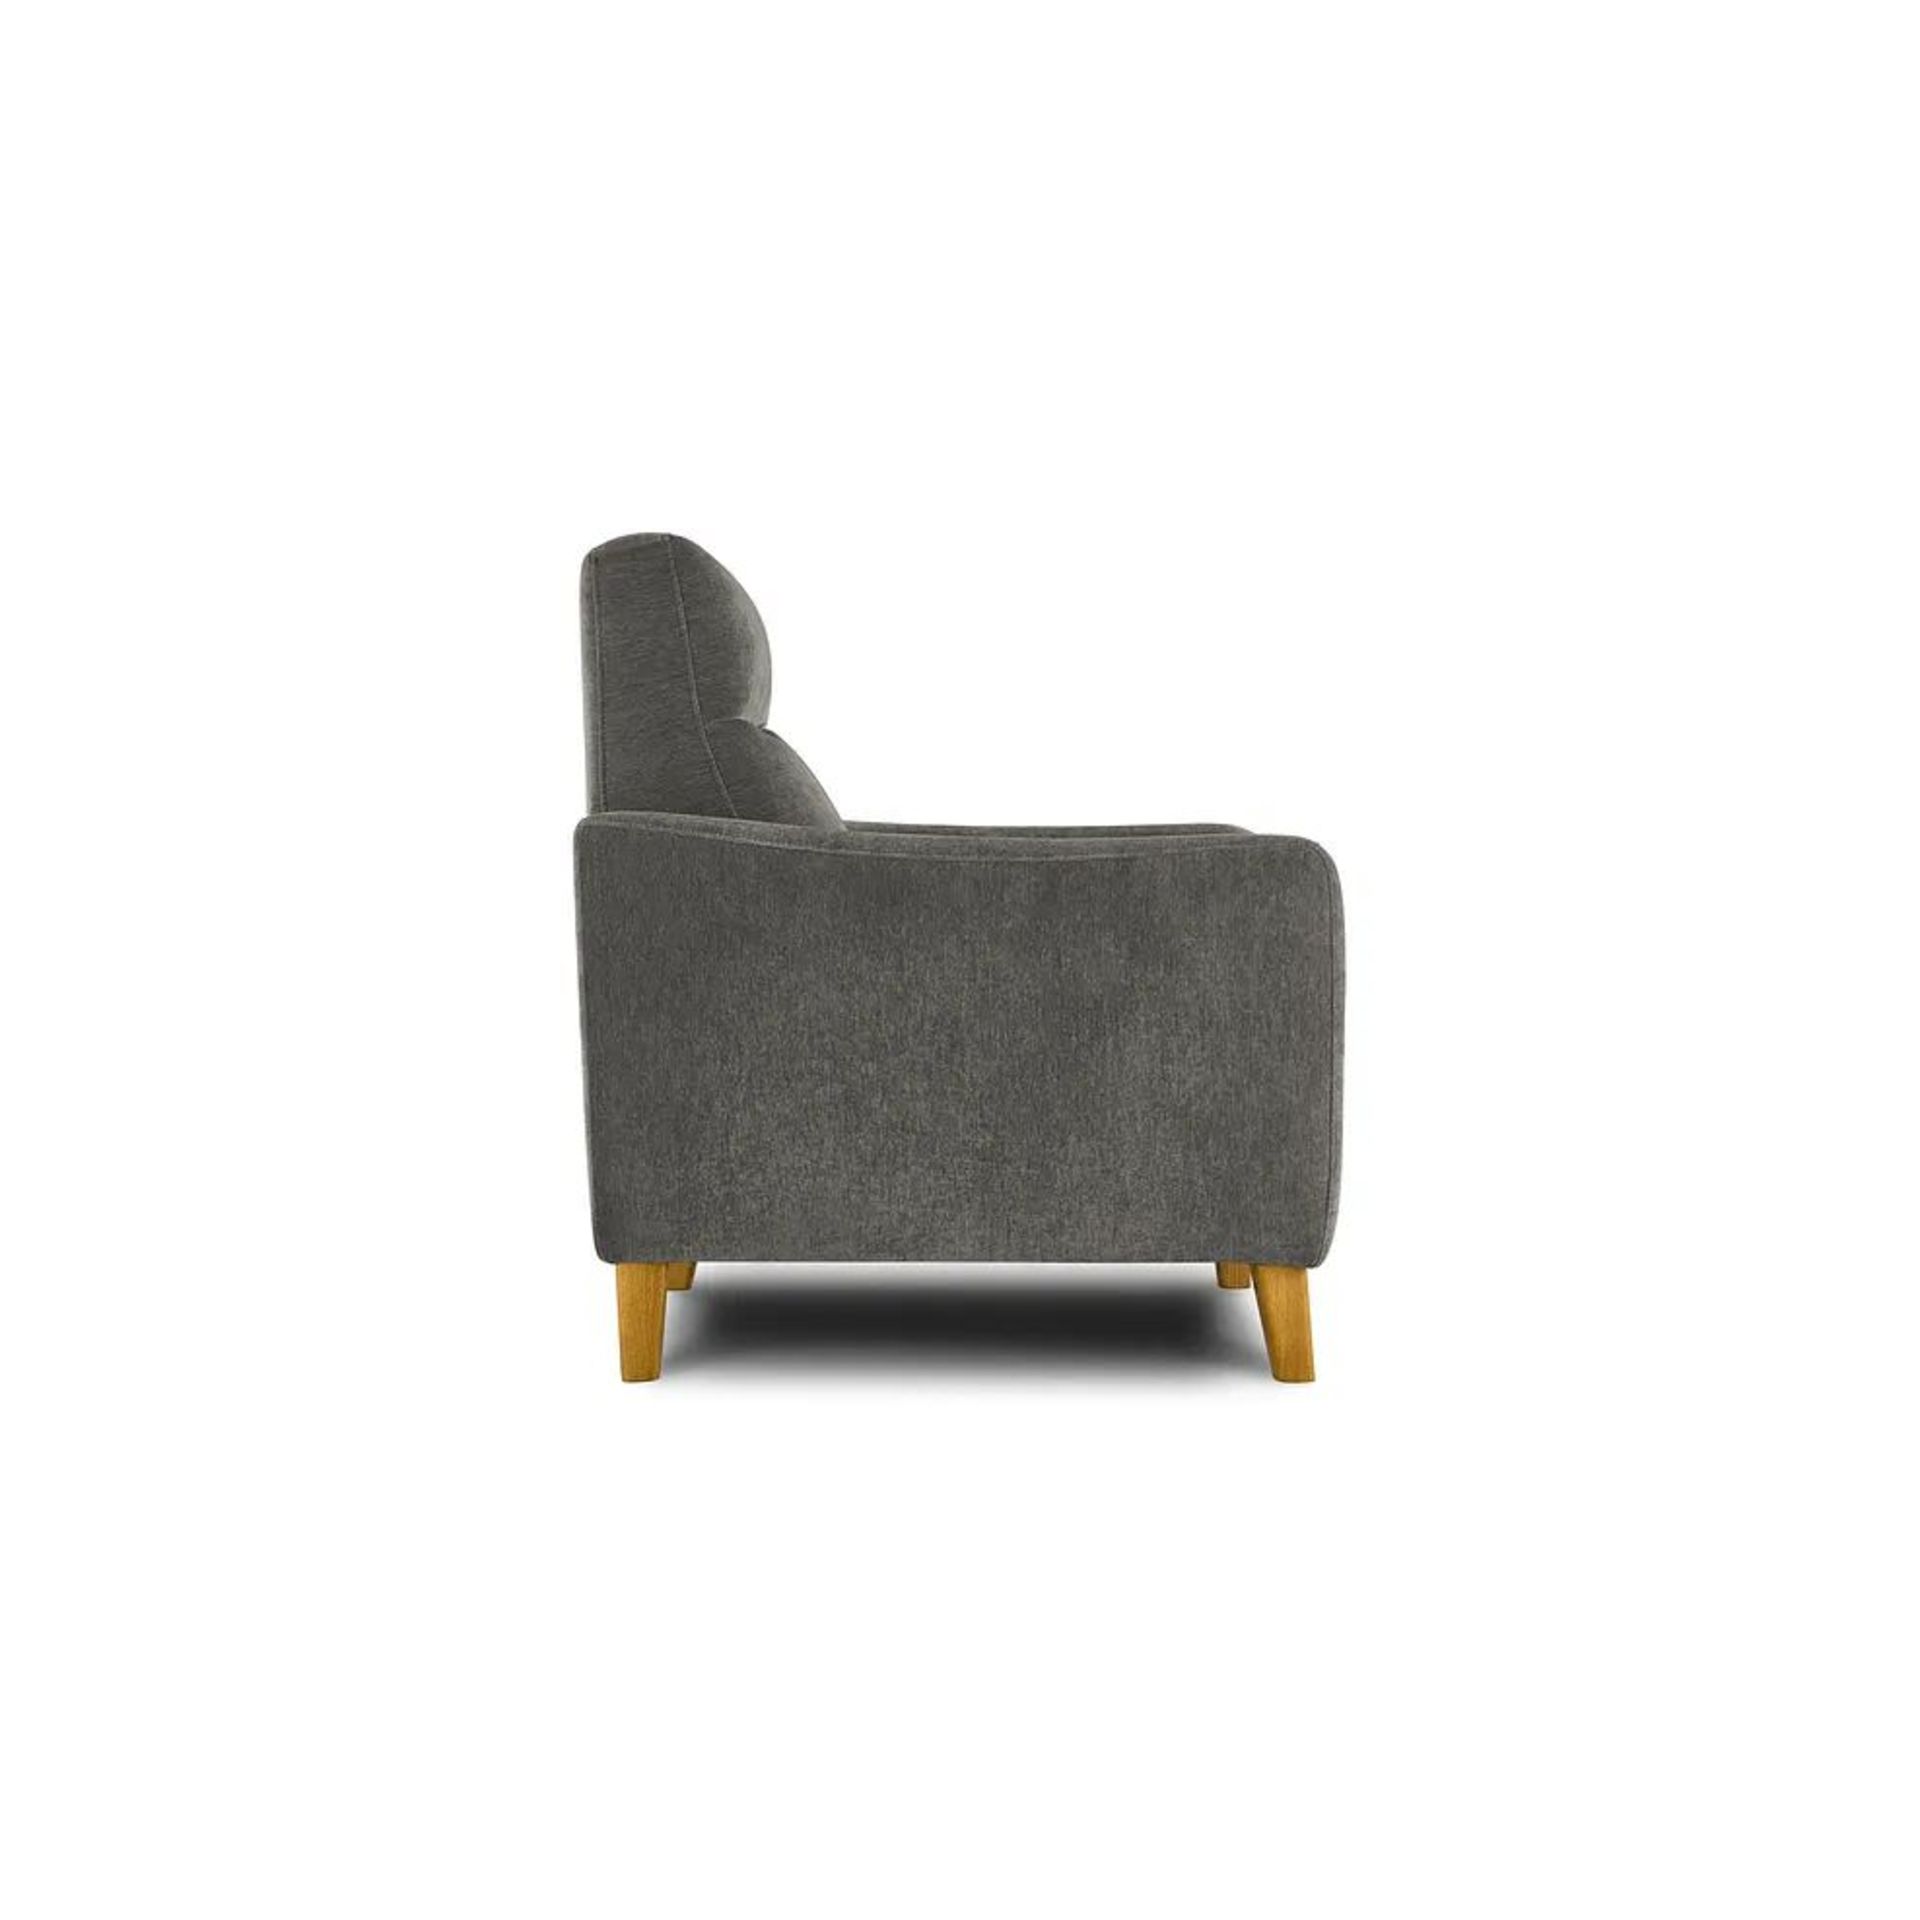 BRAND NEW DYLAN Static Armchair - DARWIN CHARCOAL FABRIC. RRP £749. Our Dylan armchair, shown here - Image 4 of 7